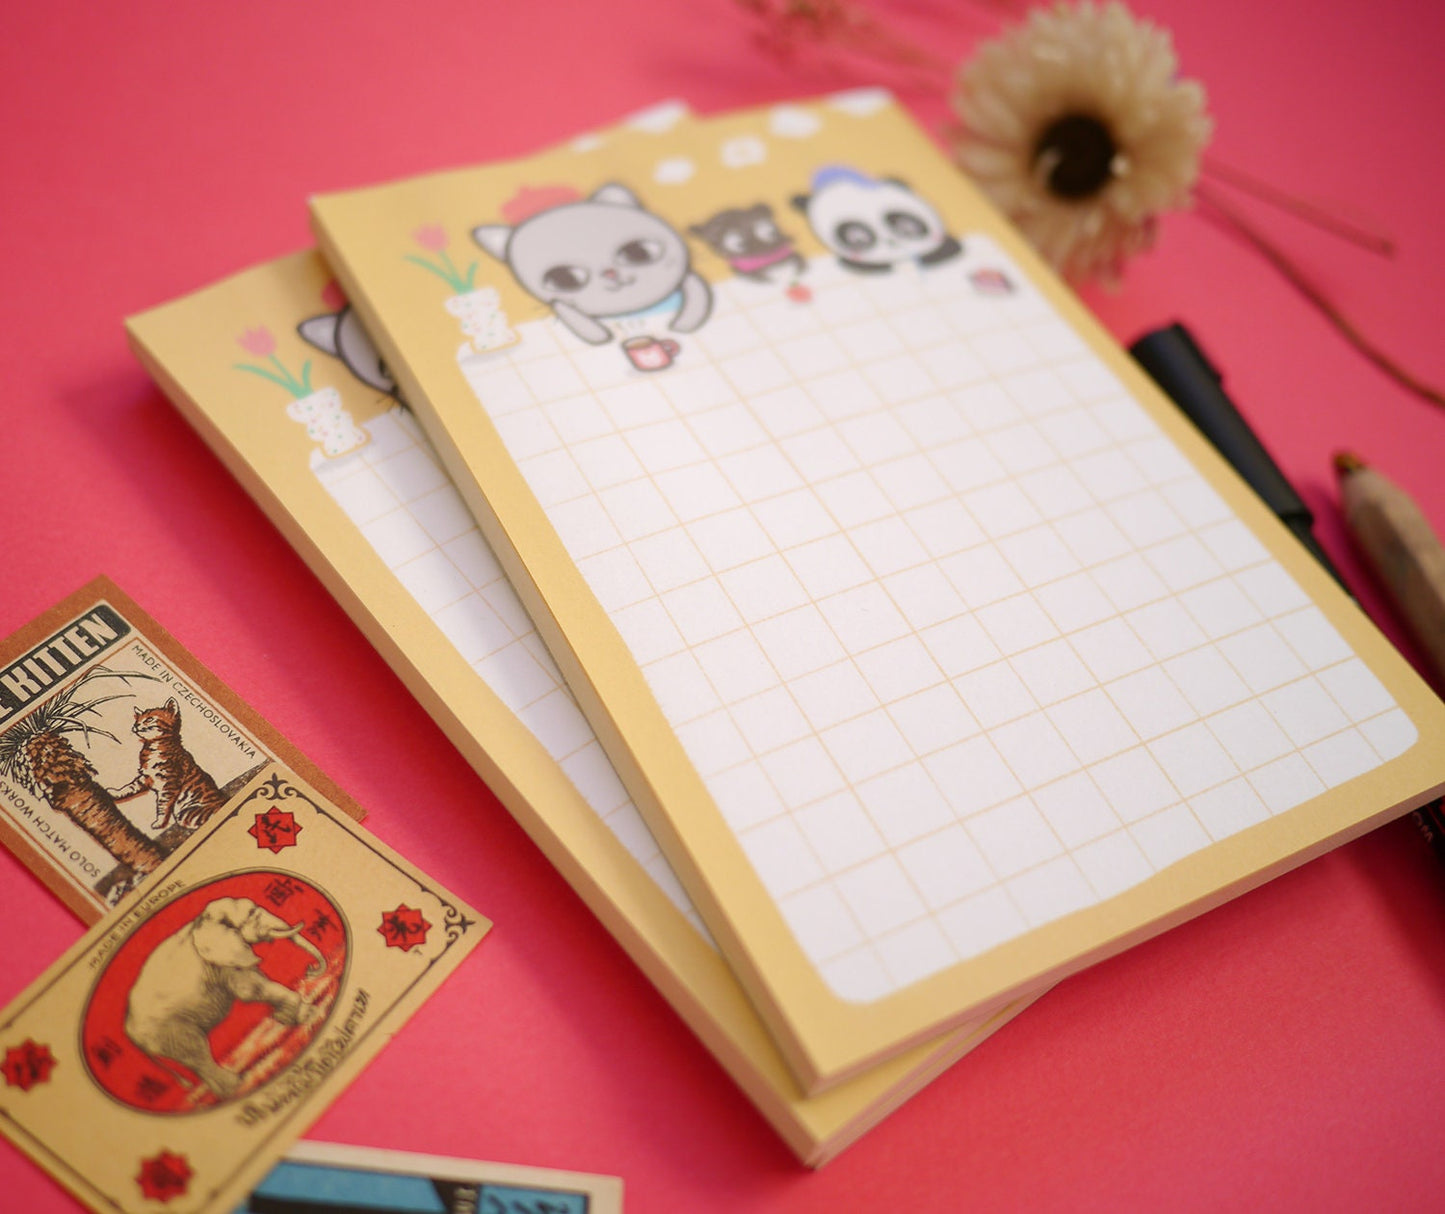 Afternoon day dreaming Notepad - A6 List pad, tear away notepad, Cute Illustration notepad